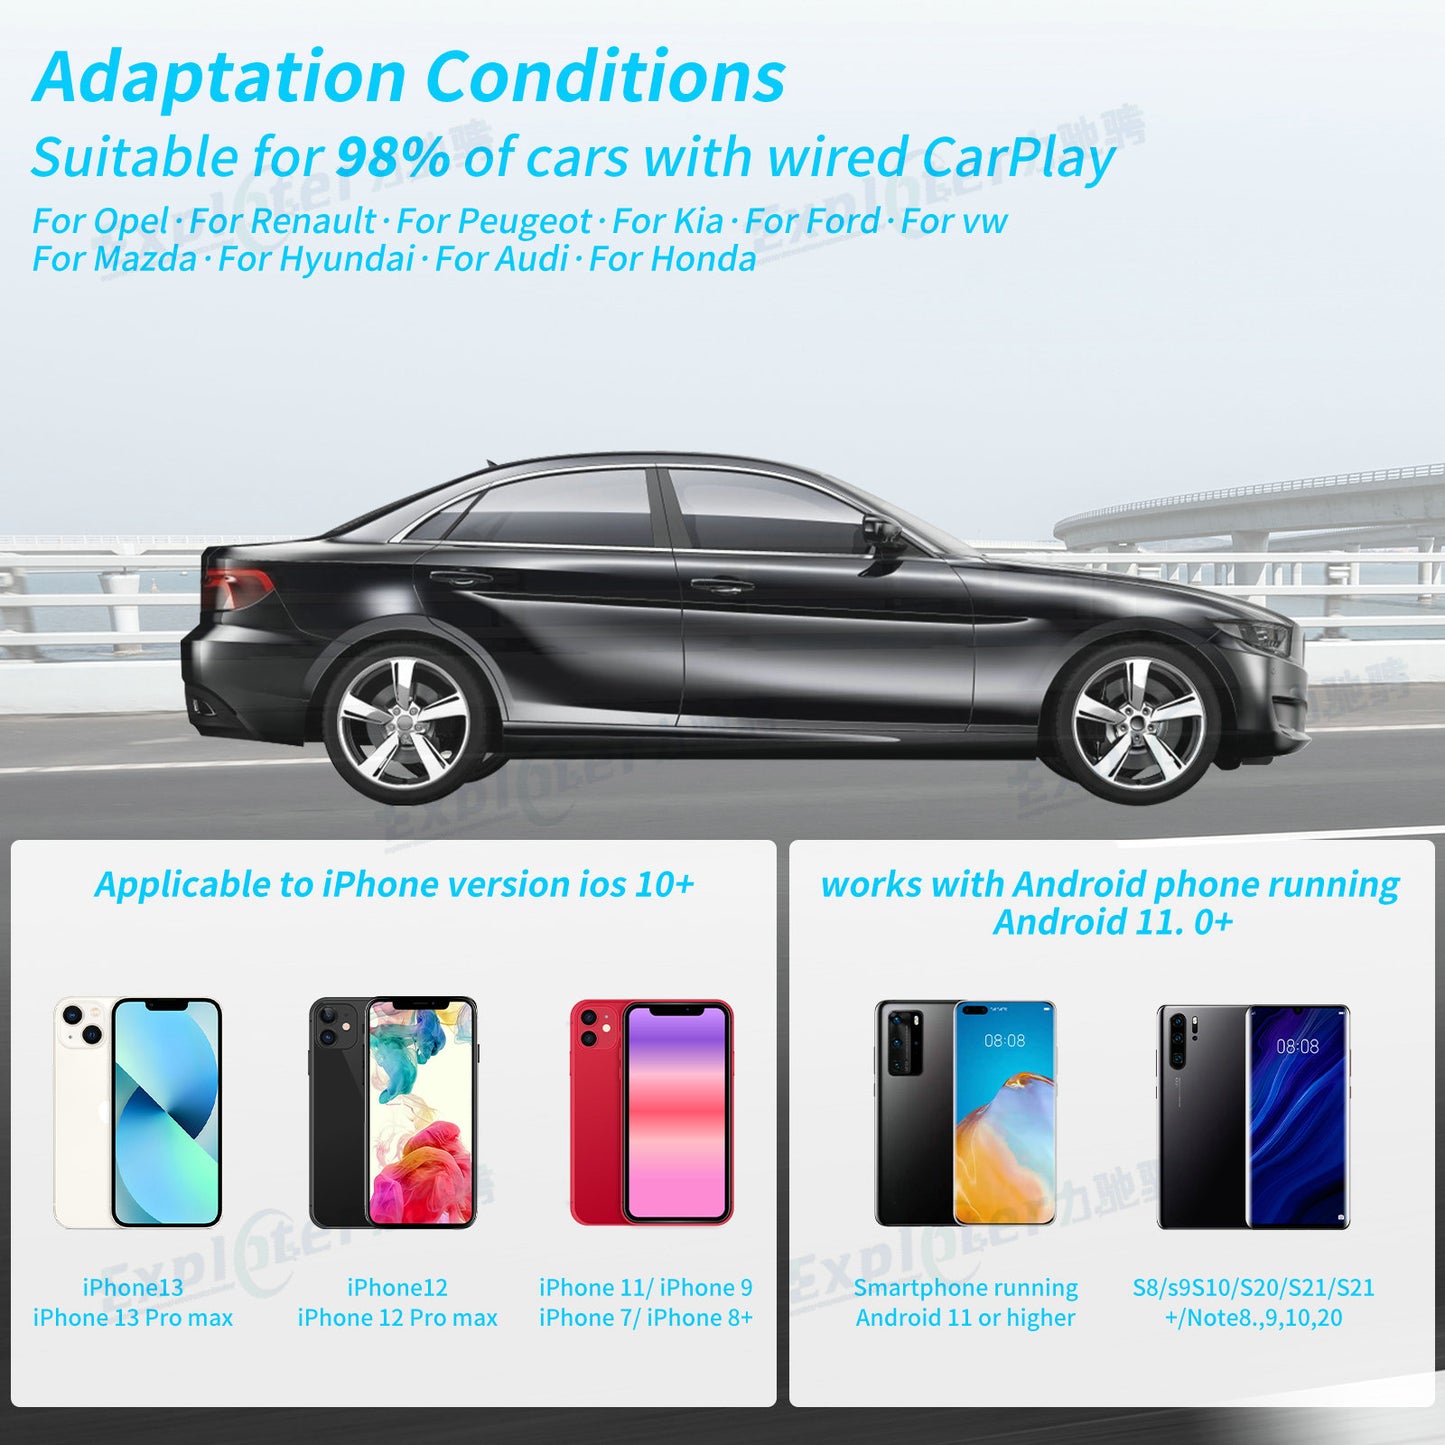 EXPLOTER AI-996 Mini Ultra US Ver ApplePie - CarPlay Converted to Android 13 System USB Dongle USA Canada 4G LTE Sim Card Qualcomm 8 Core Ram 4GB Rom 64GB GPS YouTube Netflix